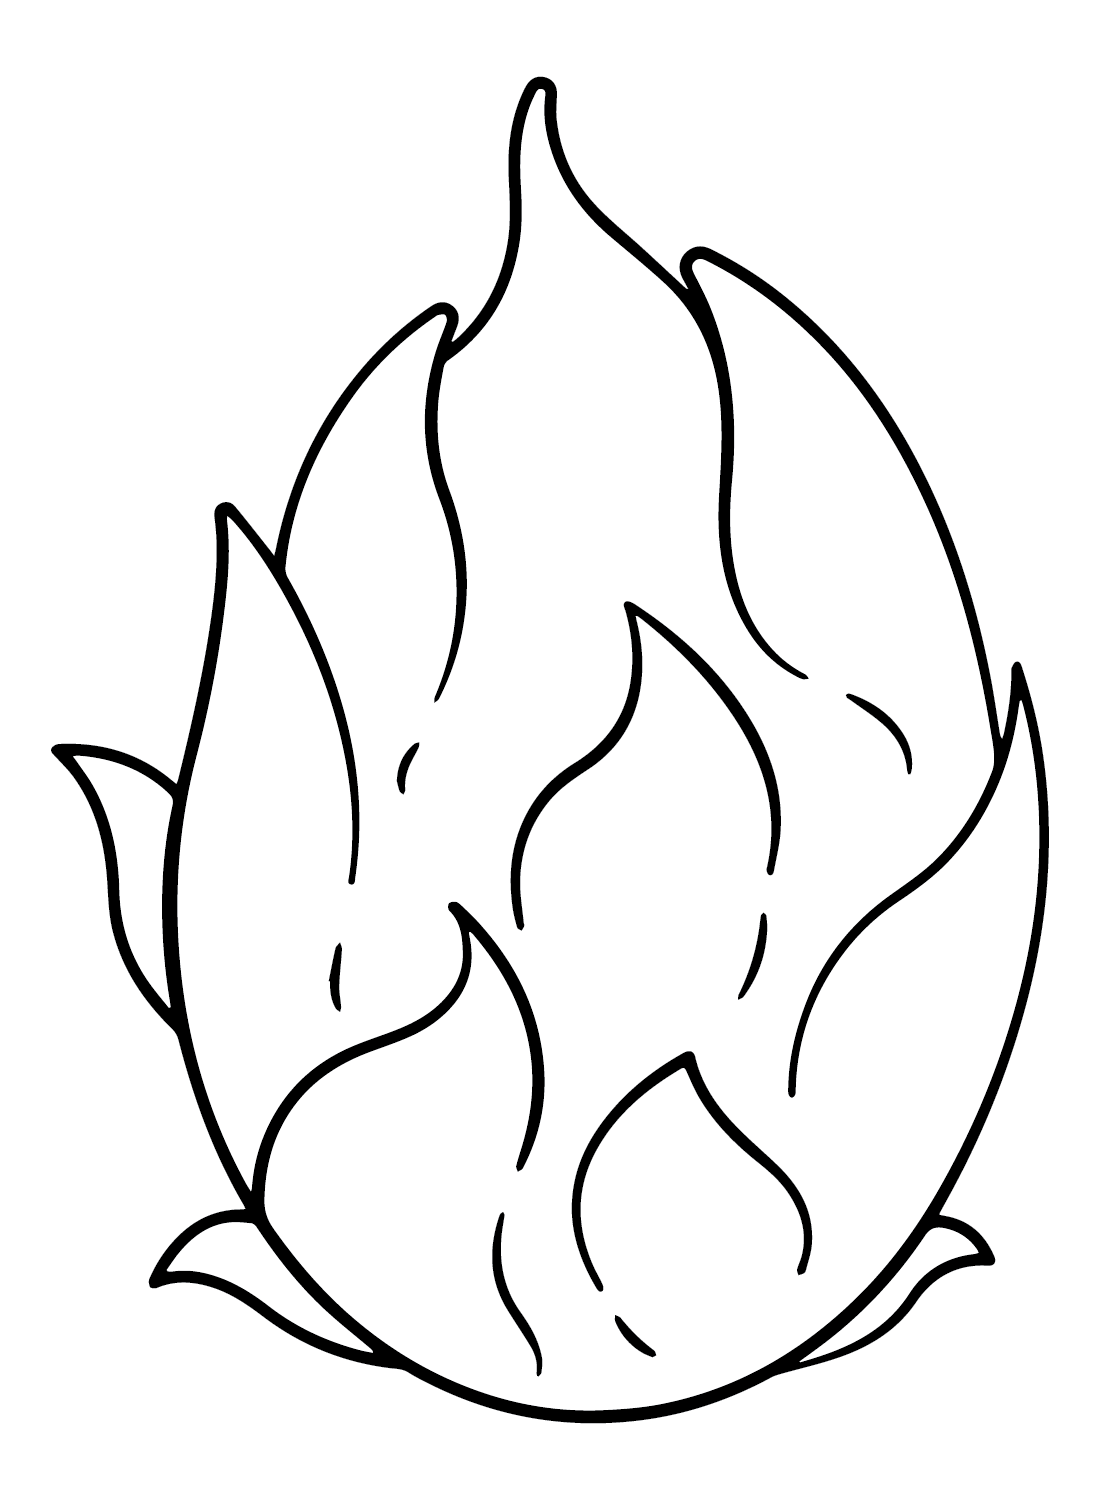 Dragon fruit coloring pages printable for free download